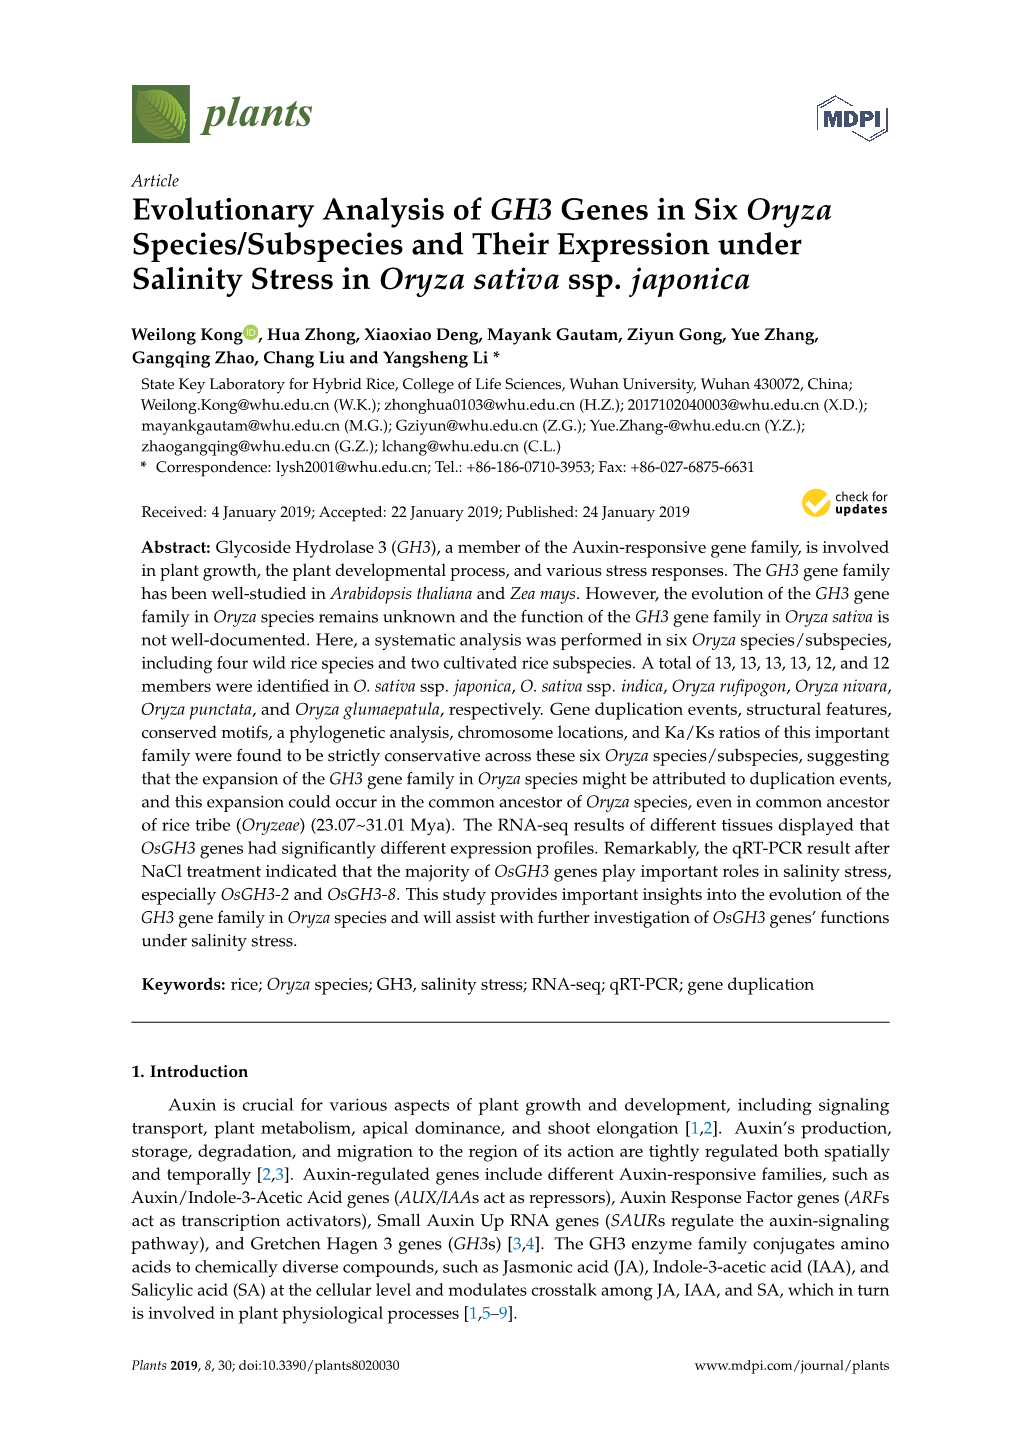 Evolutionary Analysis of GH3 Genes in Six Oryza Species/Subspecies and Their Expression Under Salinity Stress in Oryza Sativa Ssp